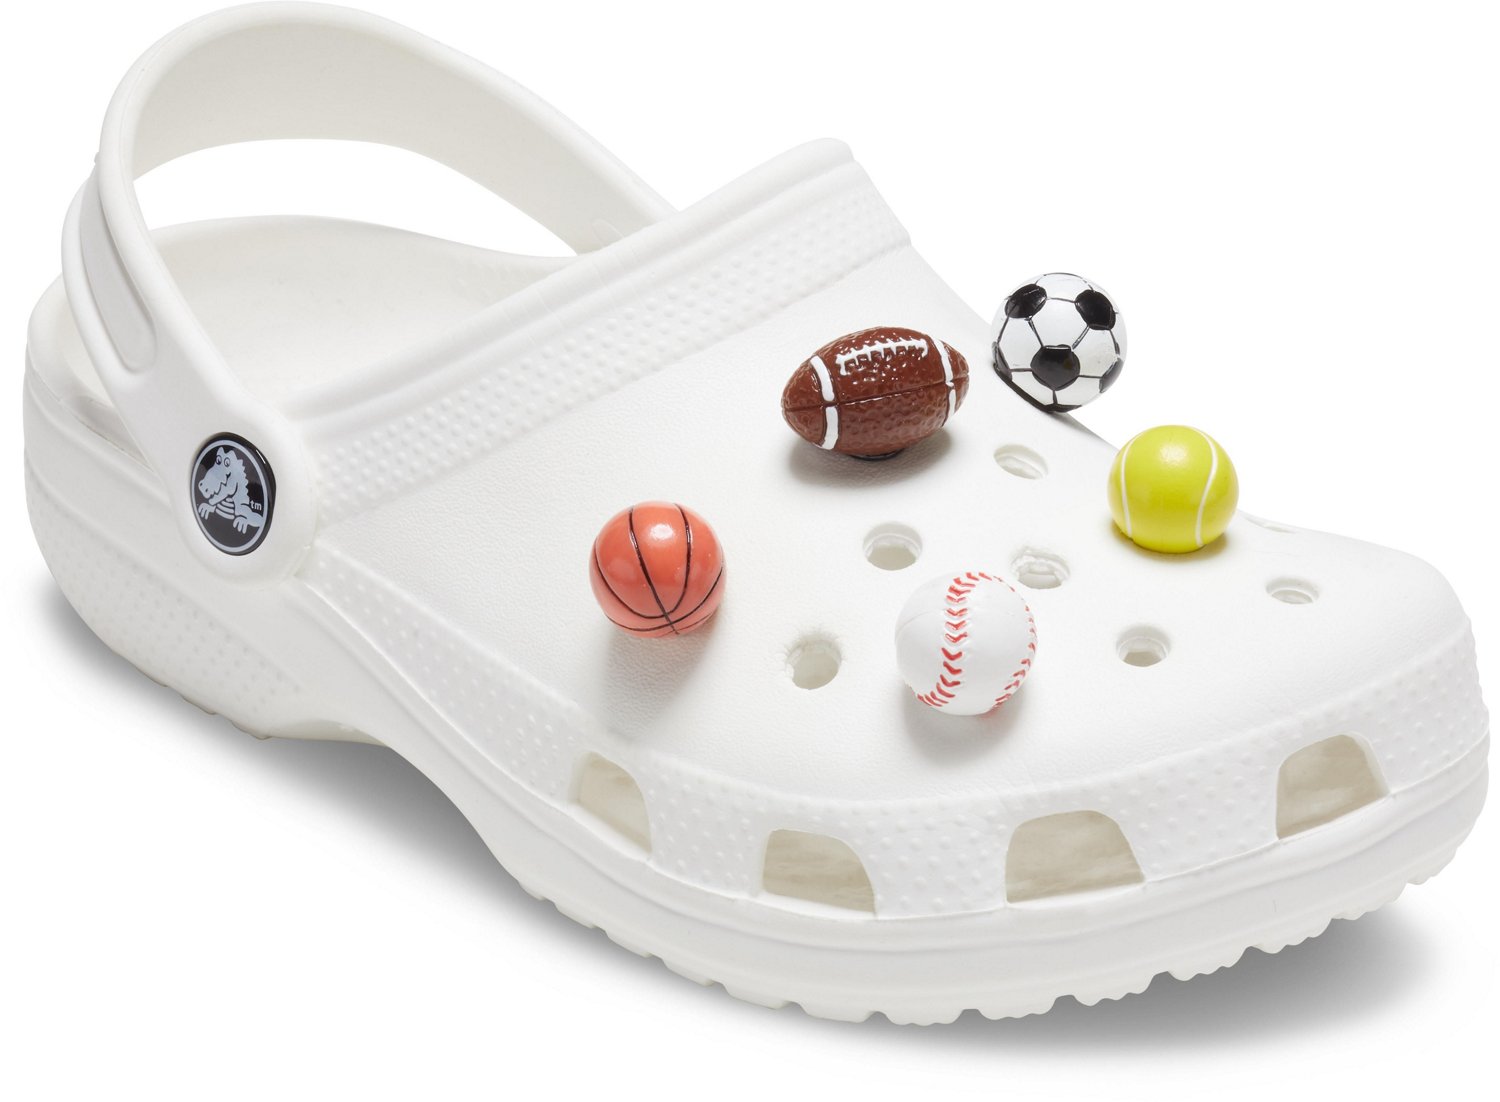 Women's Crocs Shoes and Sandals | Academy